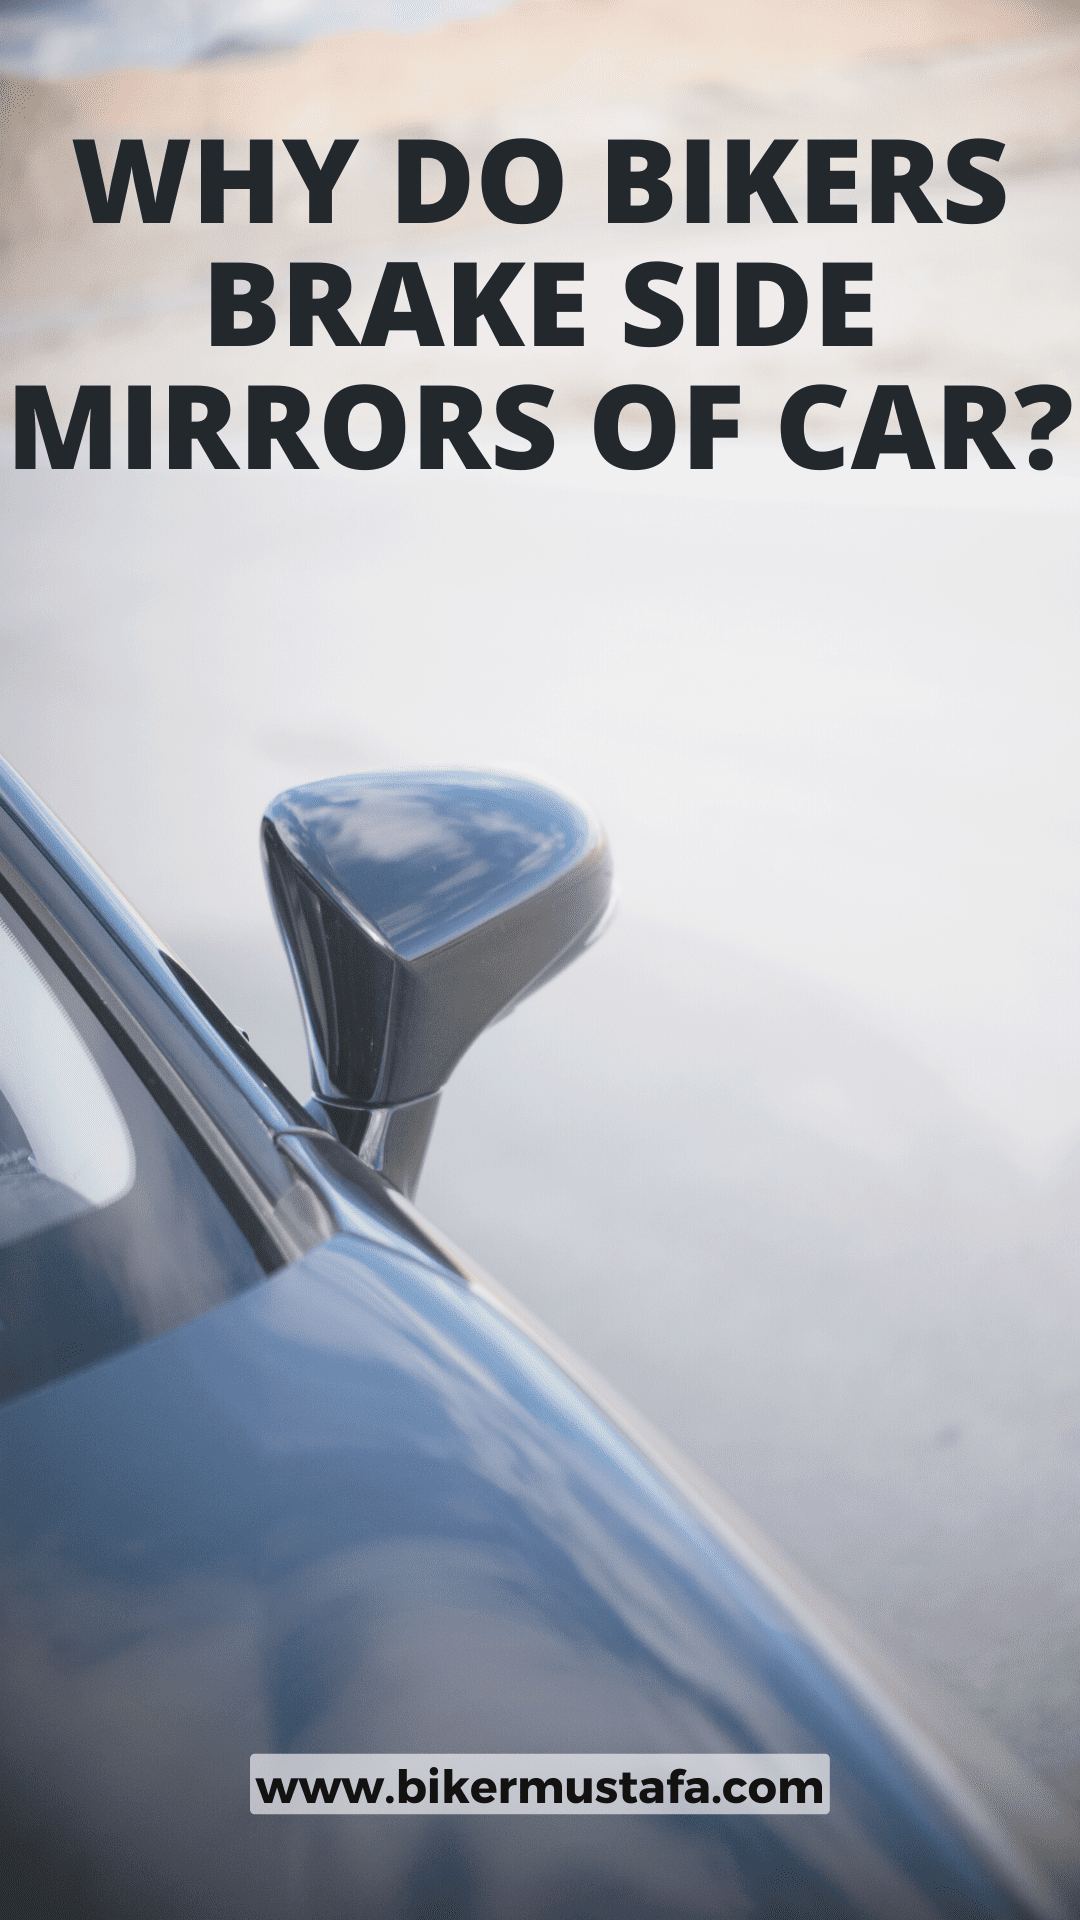 Why Do Bikers Brake Side Mirrors Of Car?